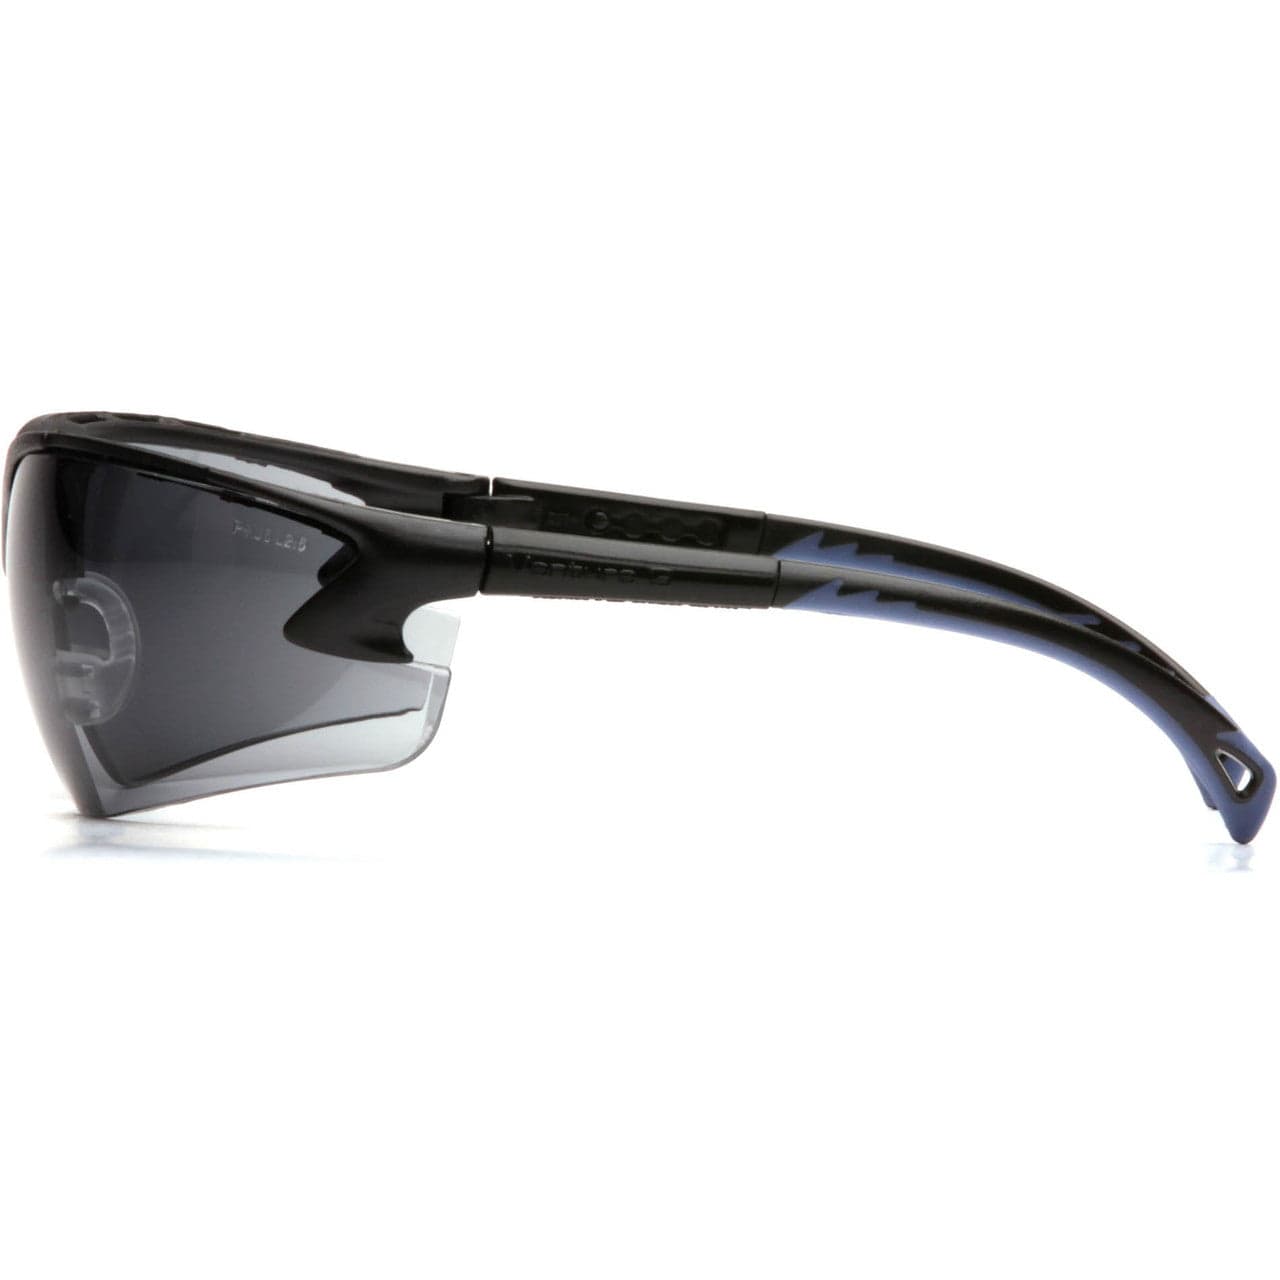 Pyramex Venture 3 Safety Glasses with Black Frame and Gray Anti-Fog Lens SB5720DT Side View